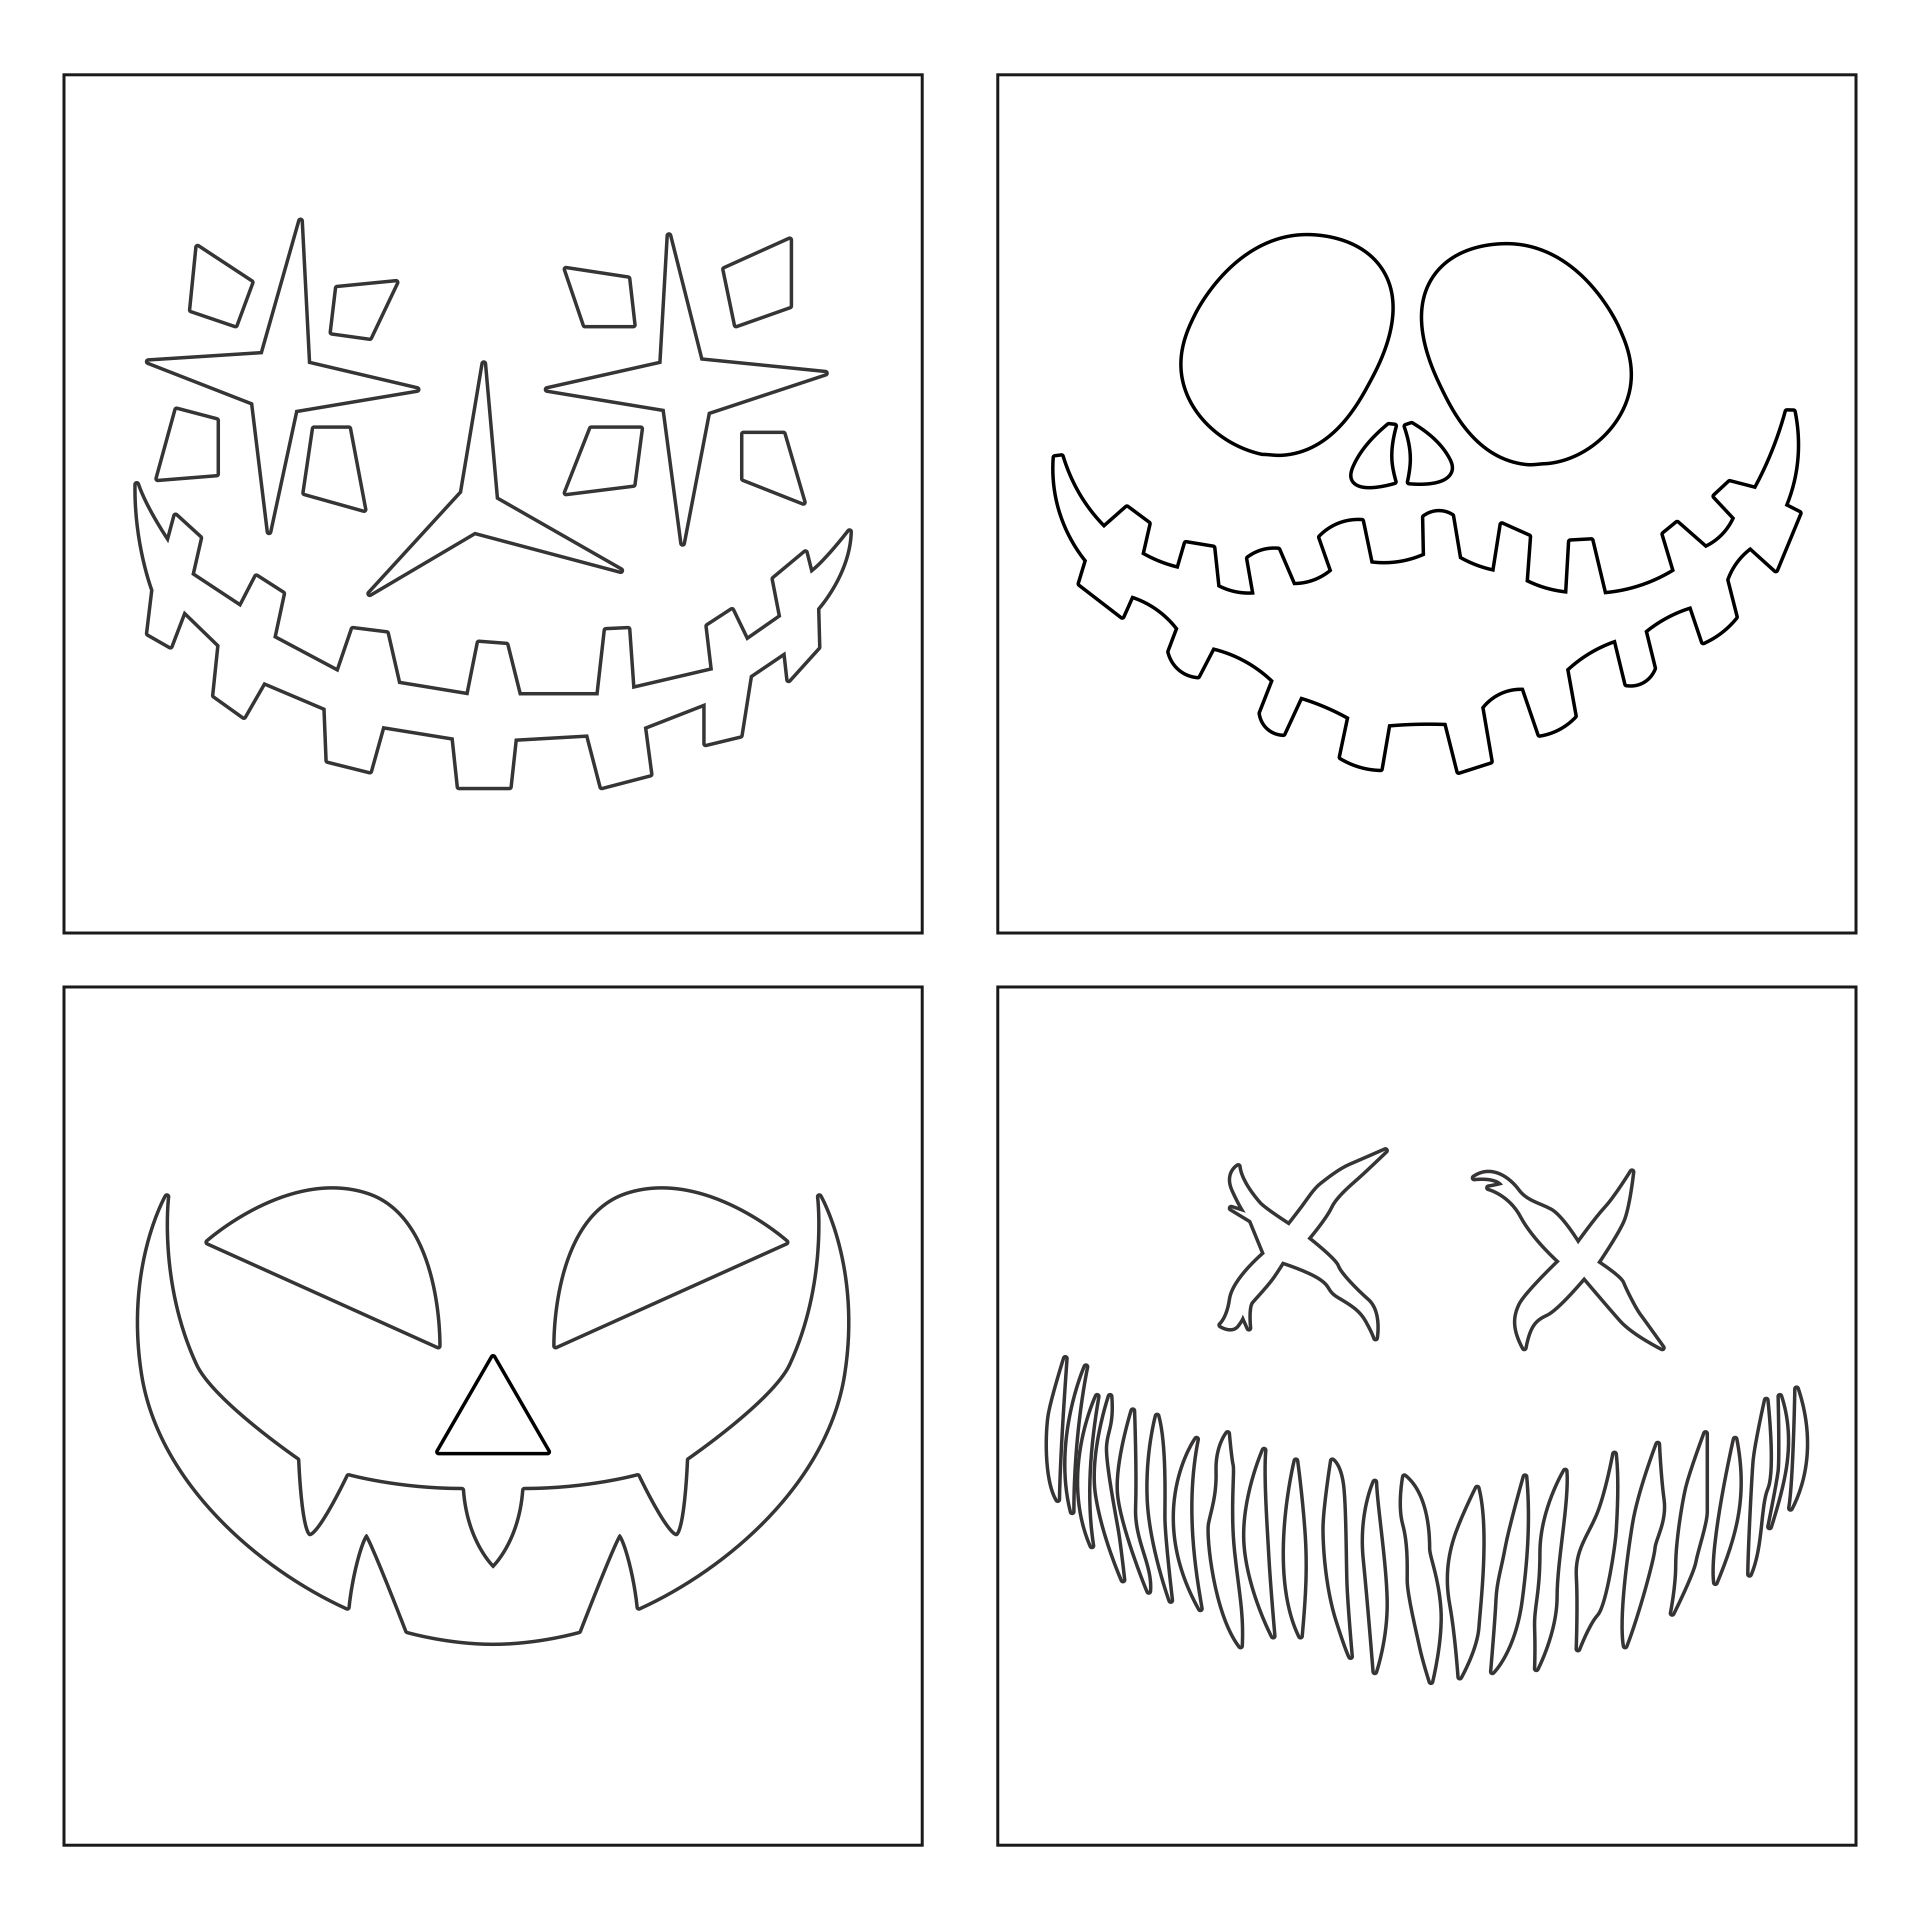 Printable Scary Halloween Pumpkin Carving Stencils Patterns